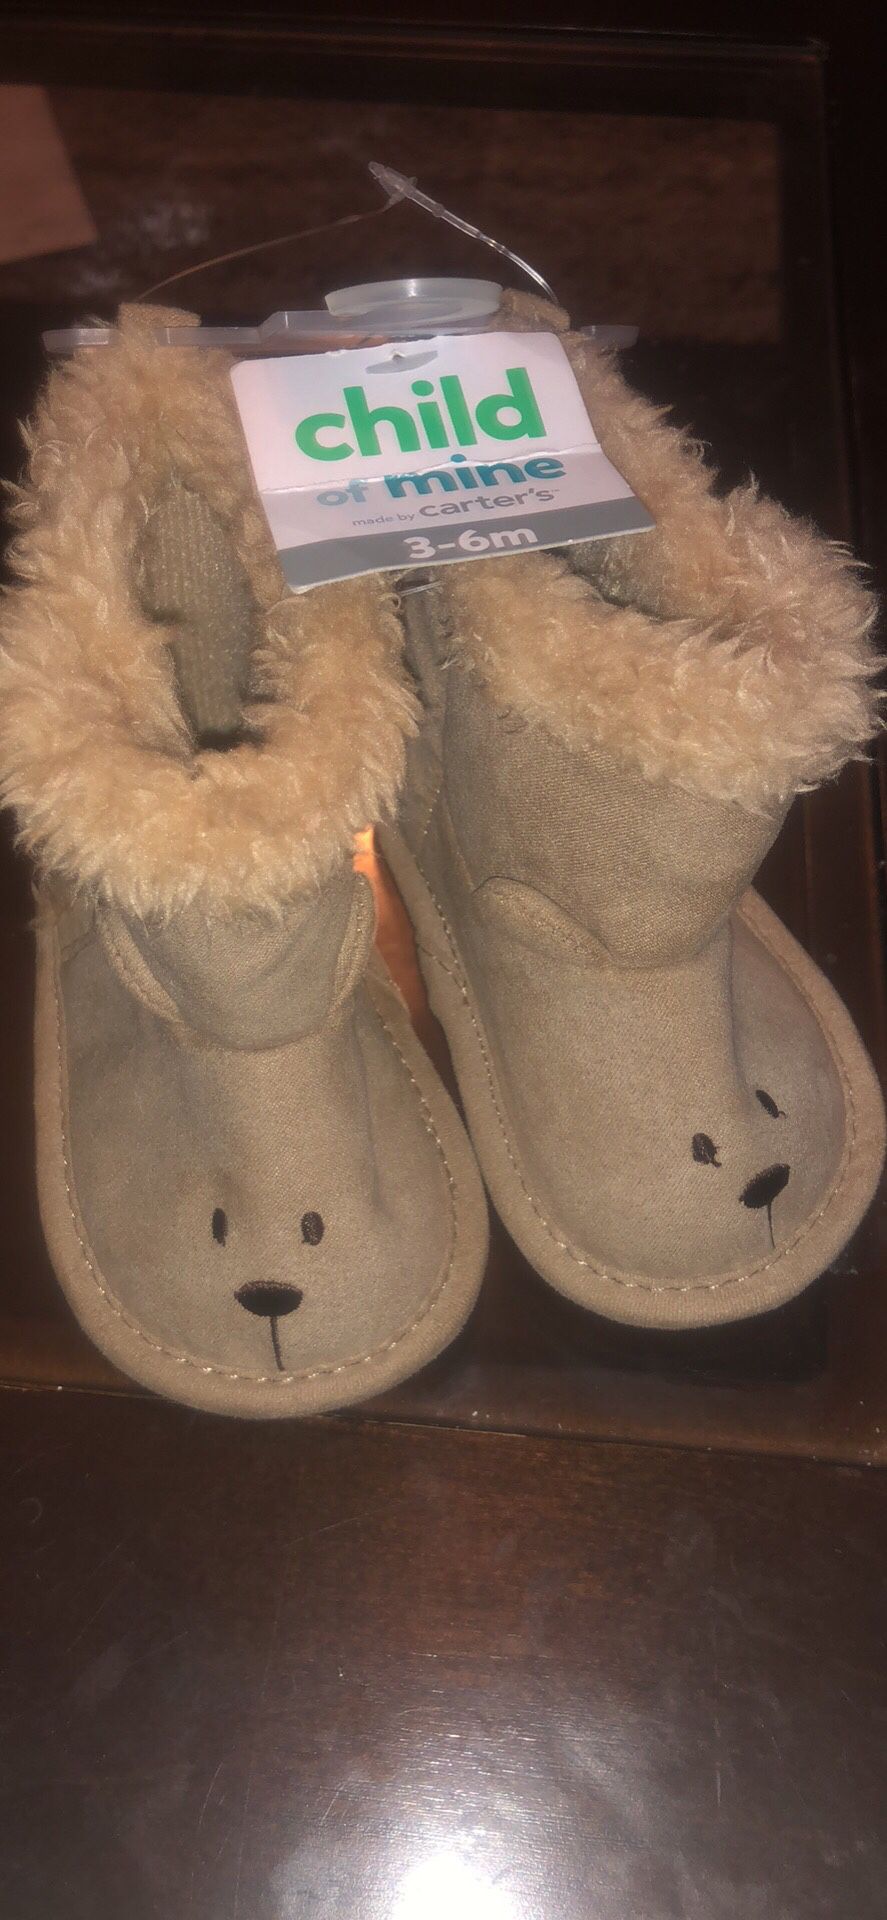 Child of mine bear boots size 3-6 months